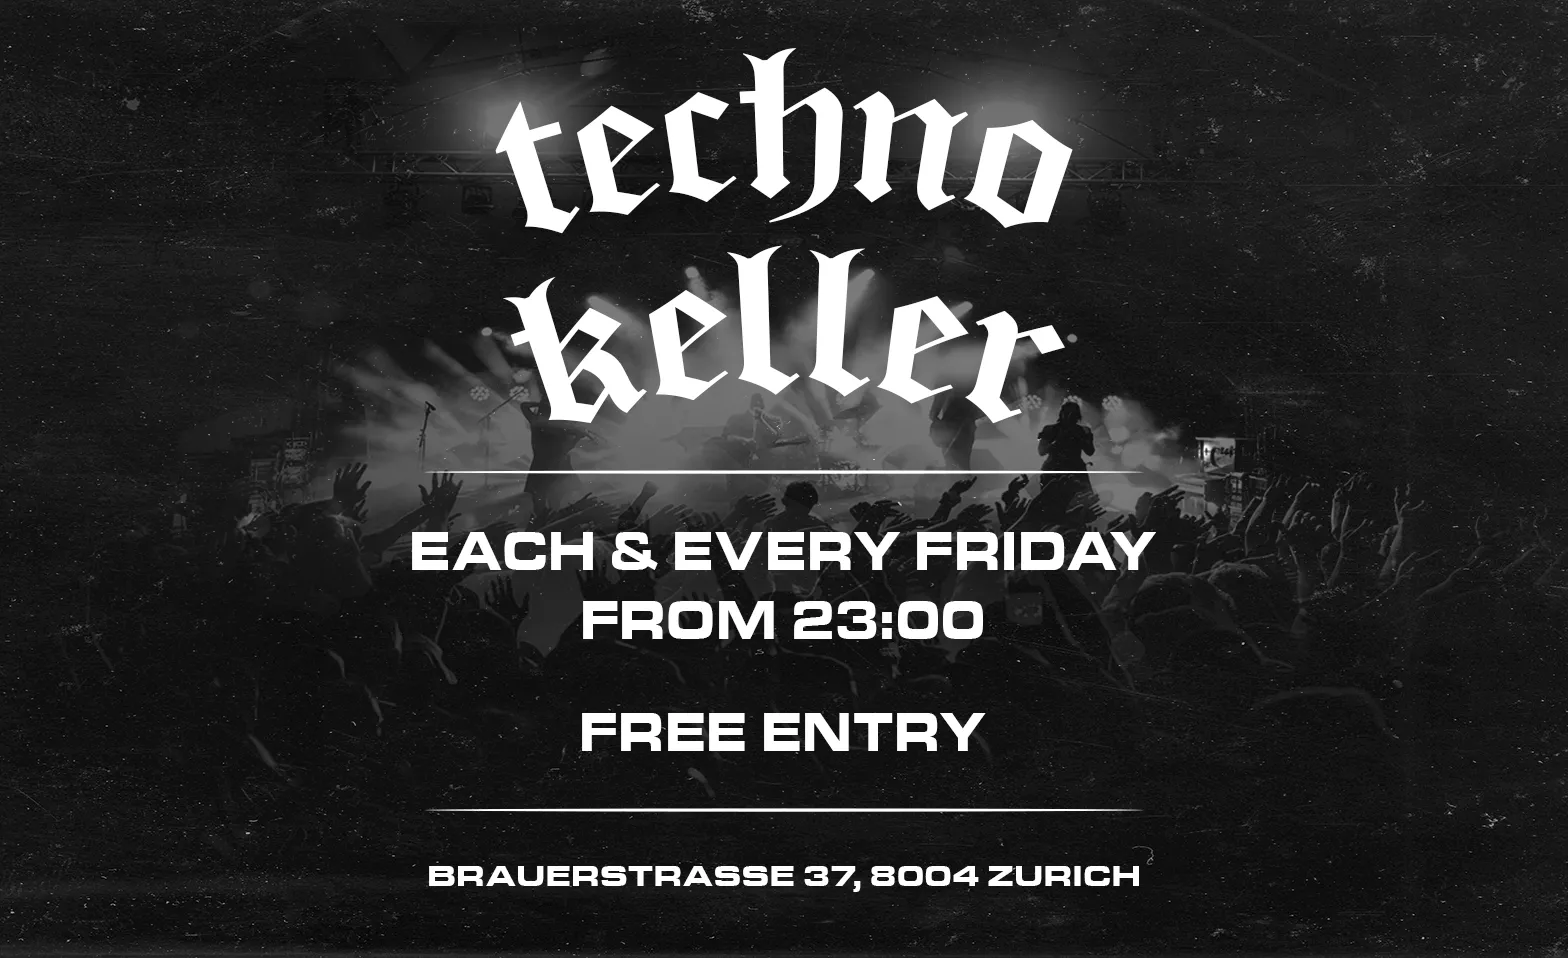 Event-Image for 'TECHNOKELLER - FREE ENTRY EACH AND EVERY FRIDAY'